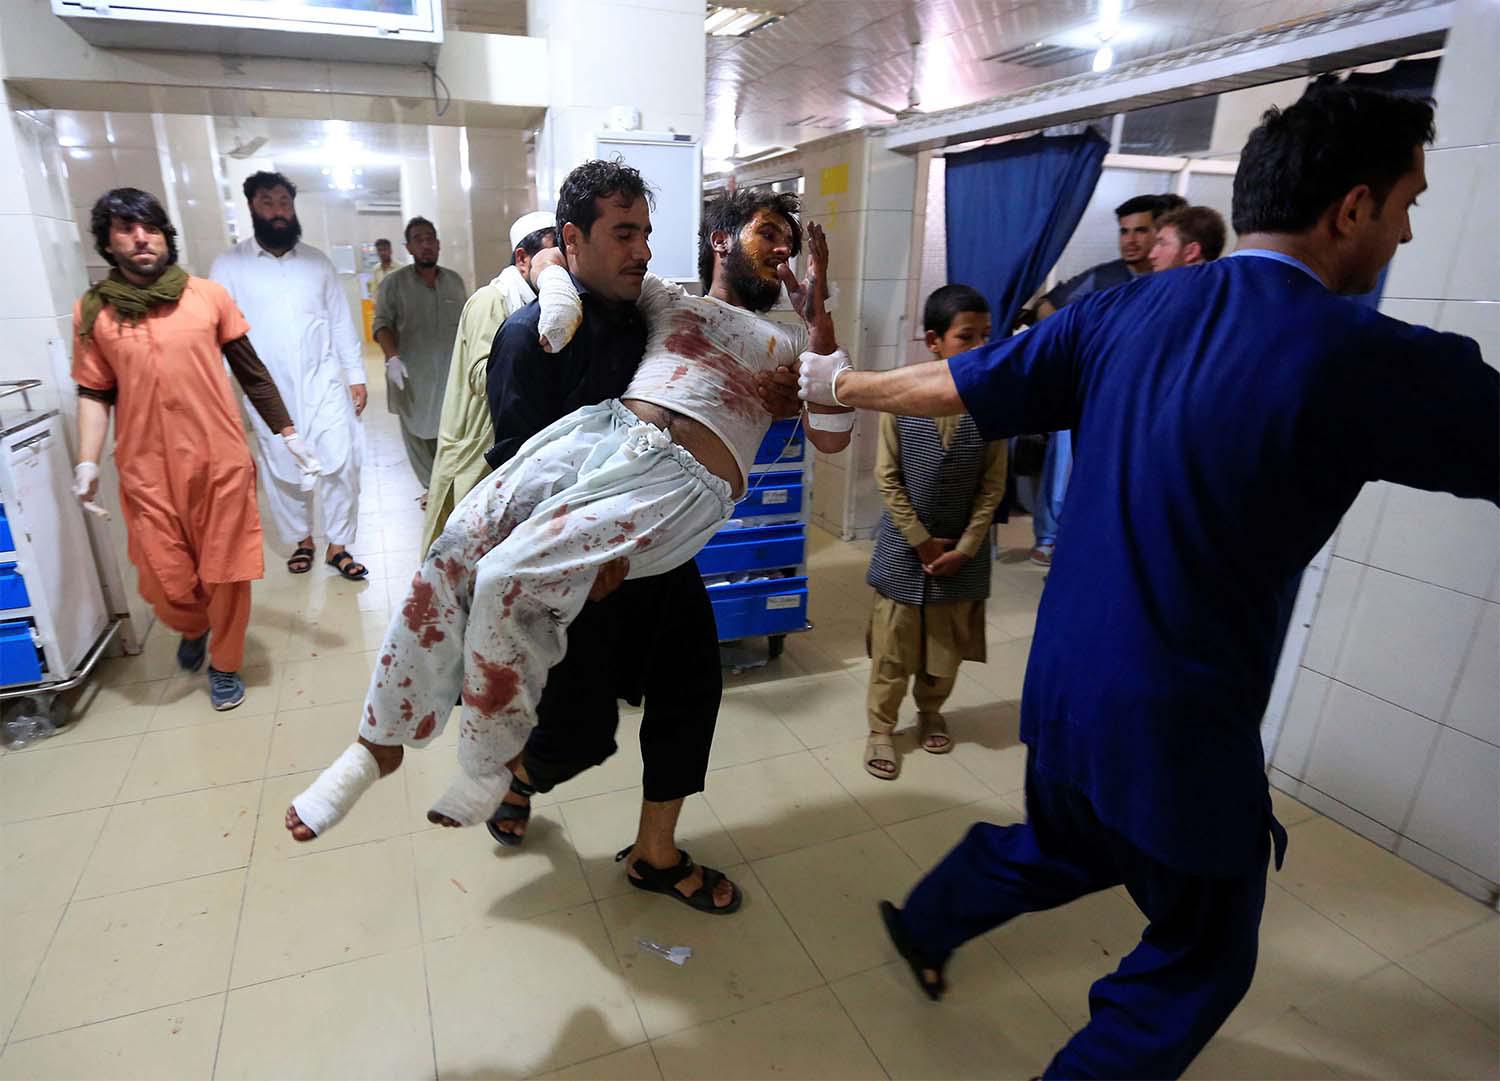 A man carries an injured person in a hospital after blasts, in Jalalabad